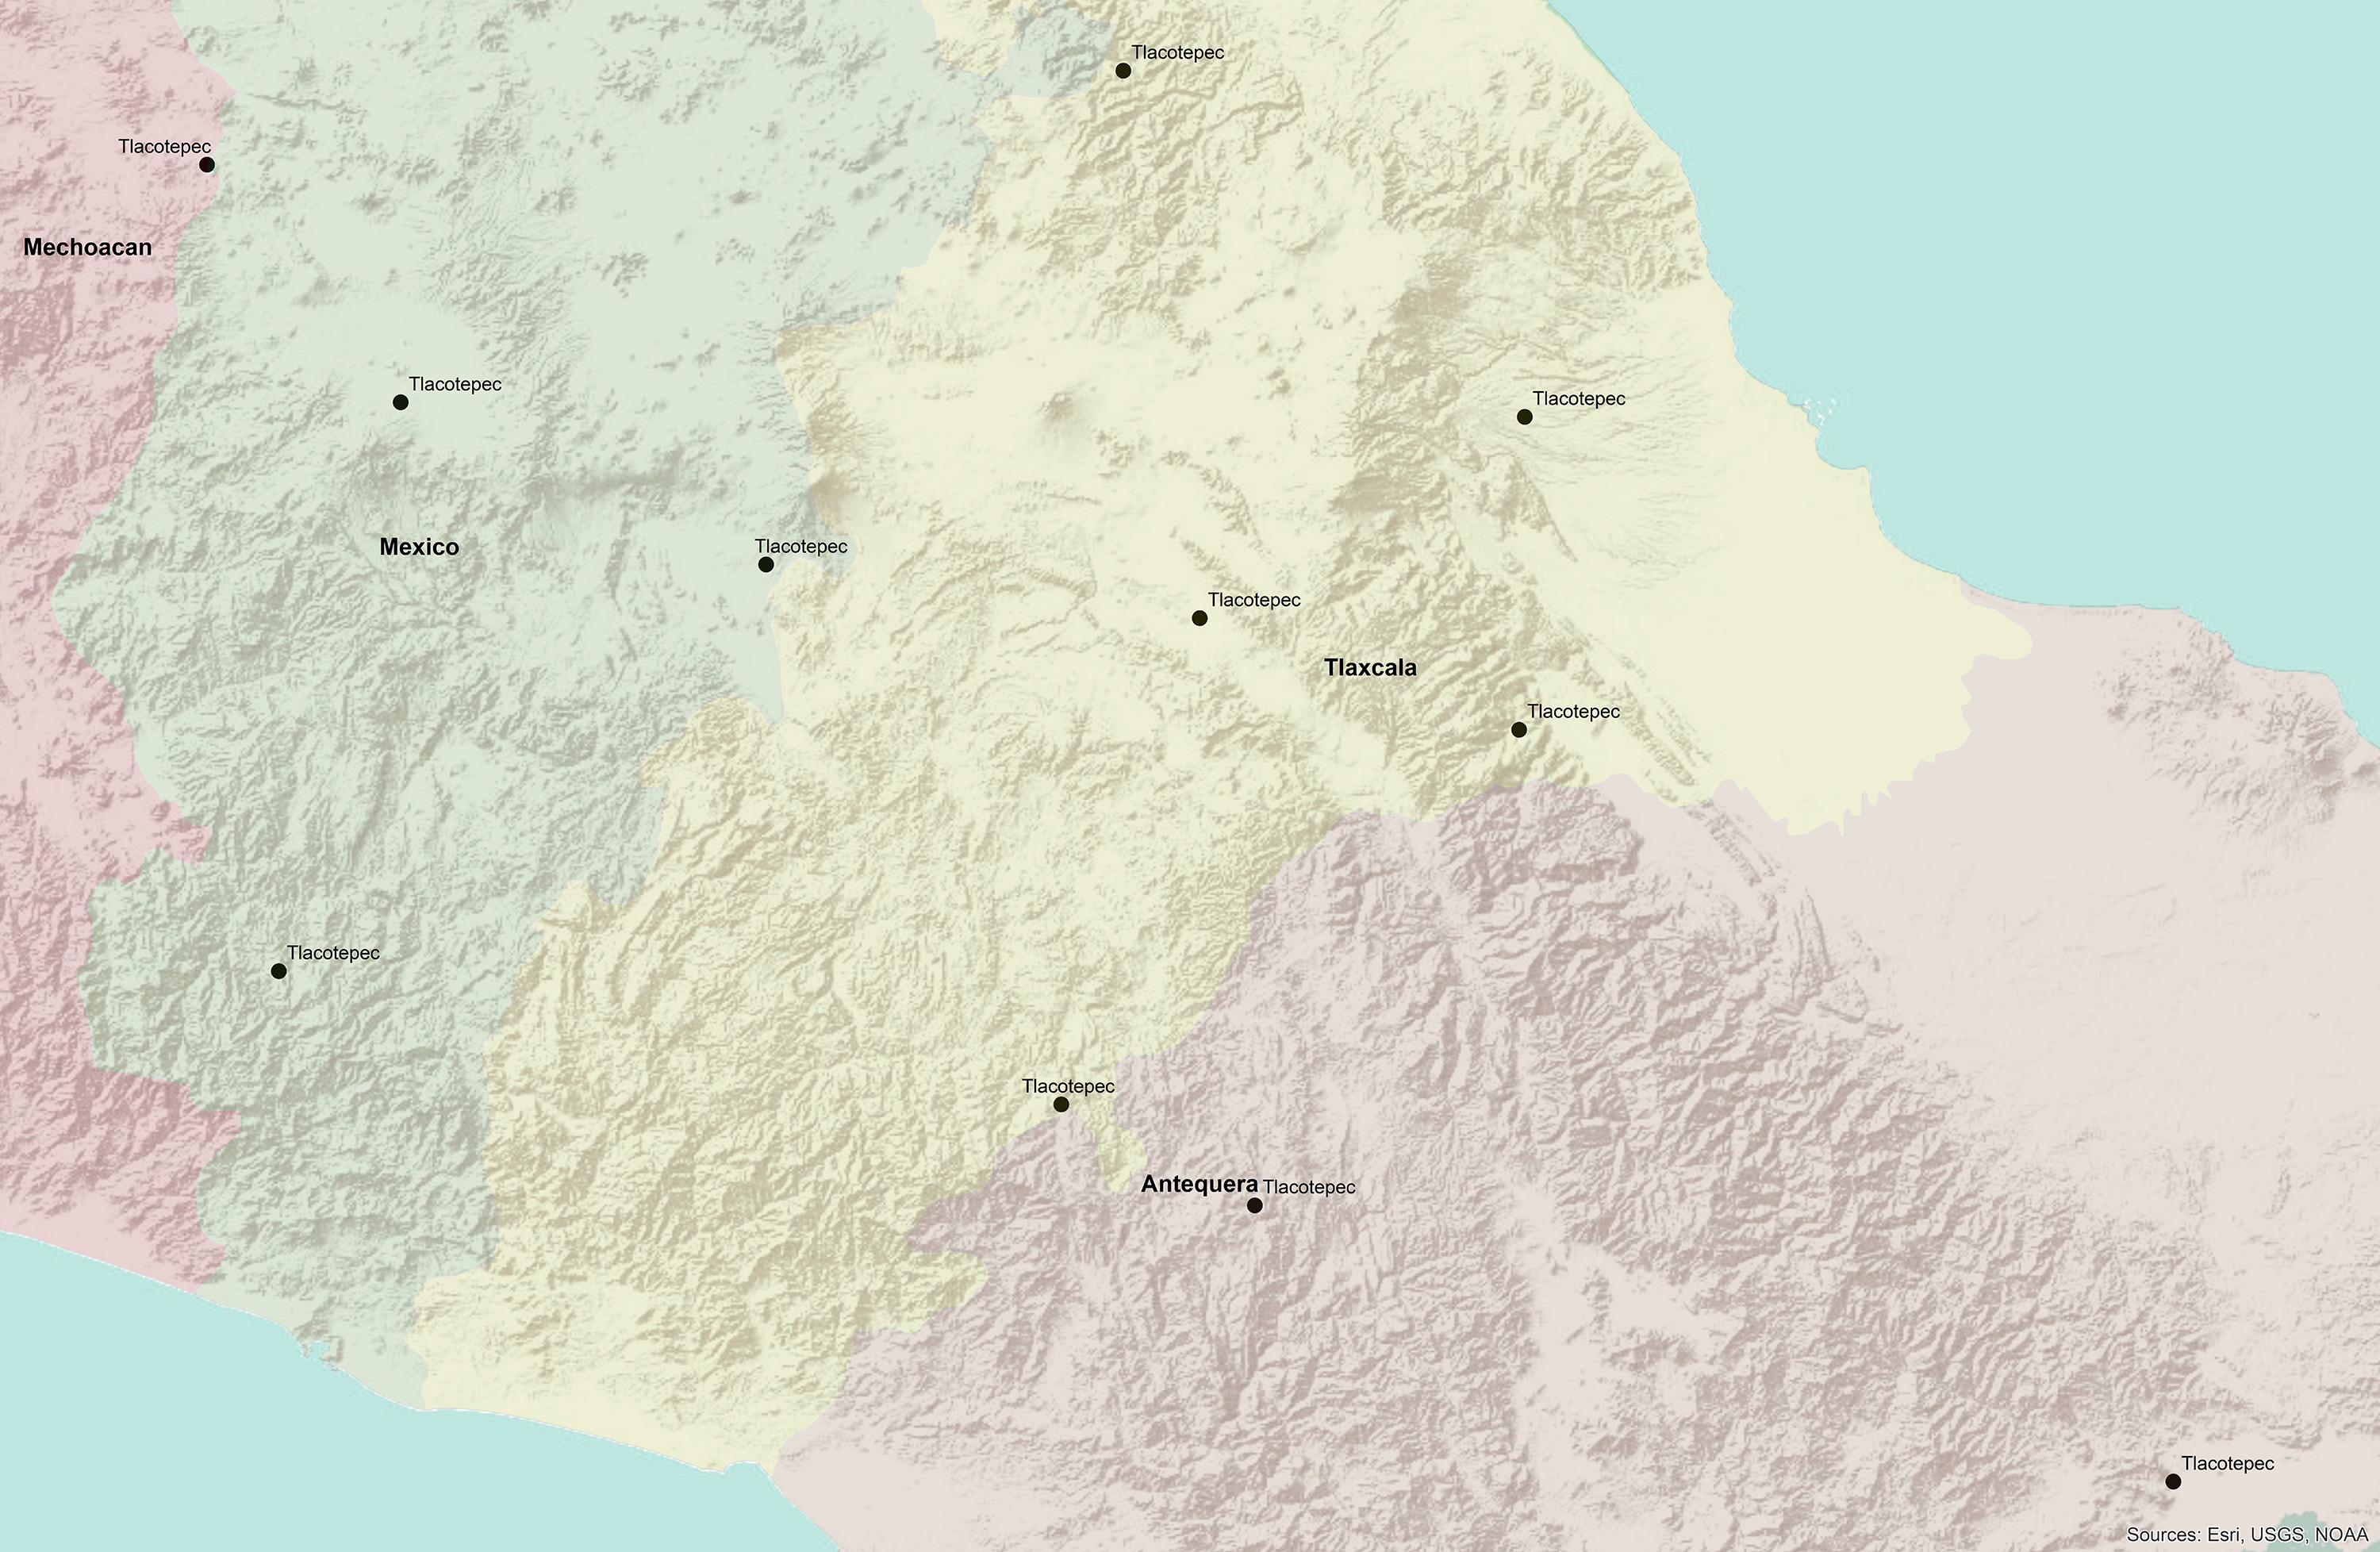 Map displaying multiple occurrences of the toponym Tlacotepec across central Mexico